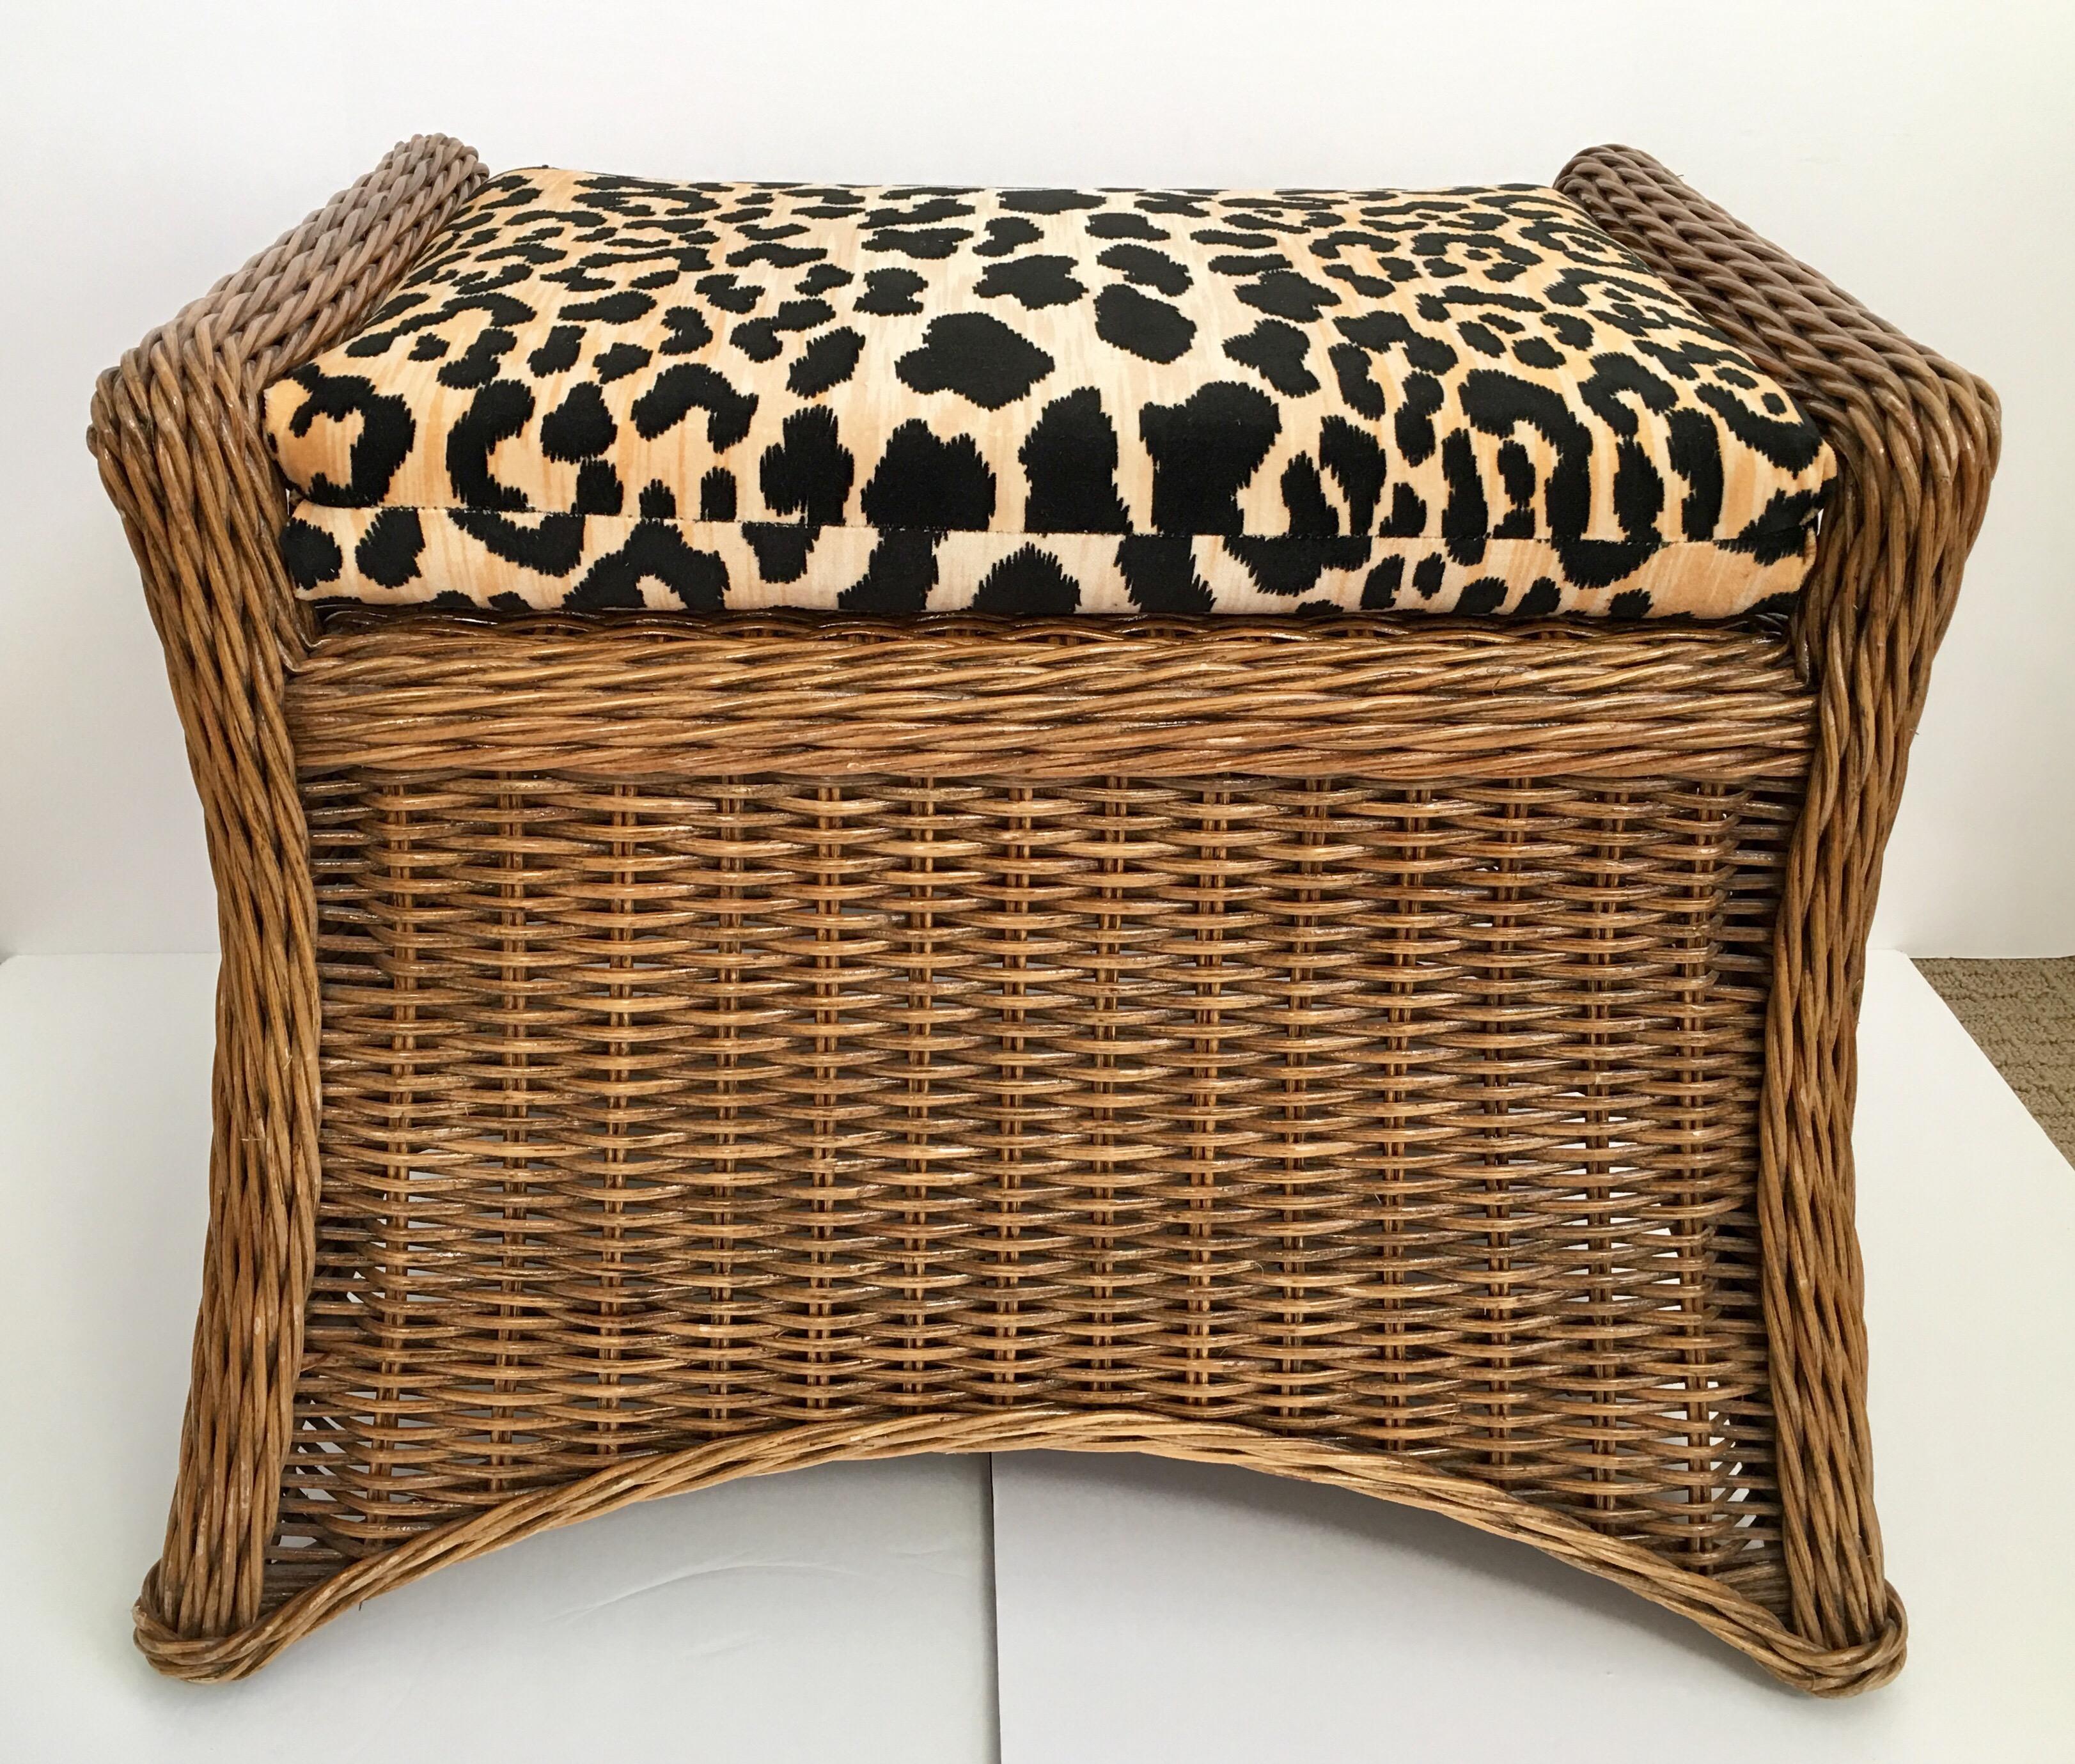 Sculptural woven rattan wicker bench with new custom leopard cheetah print cotton velvet seat cushion. This vintage stool features a curved base with open side handles. Bamboo framing makes this ottoman very sturdy. A versatile accent seat or vanity